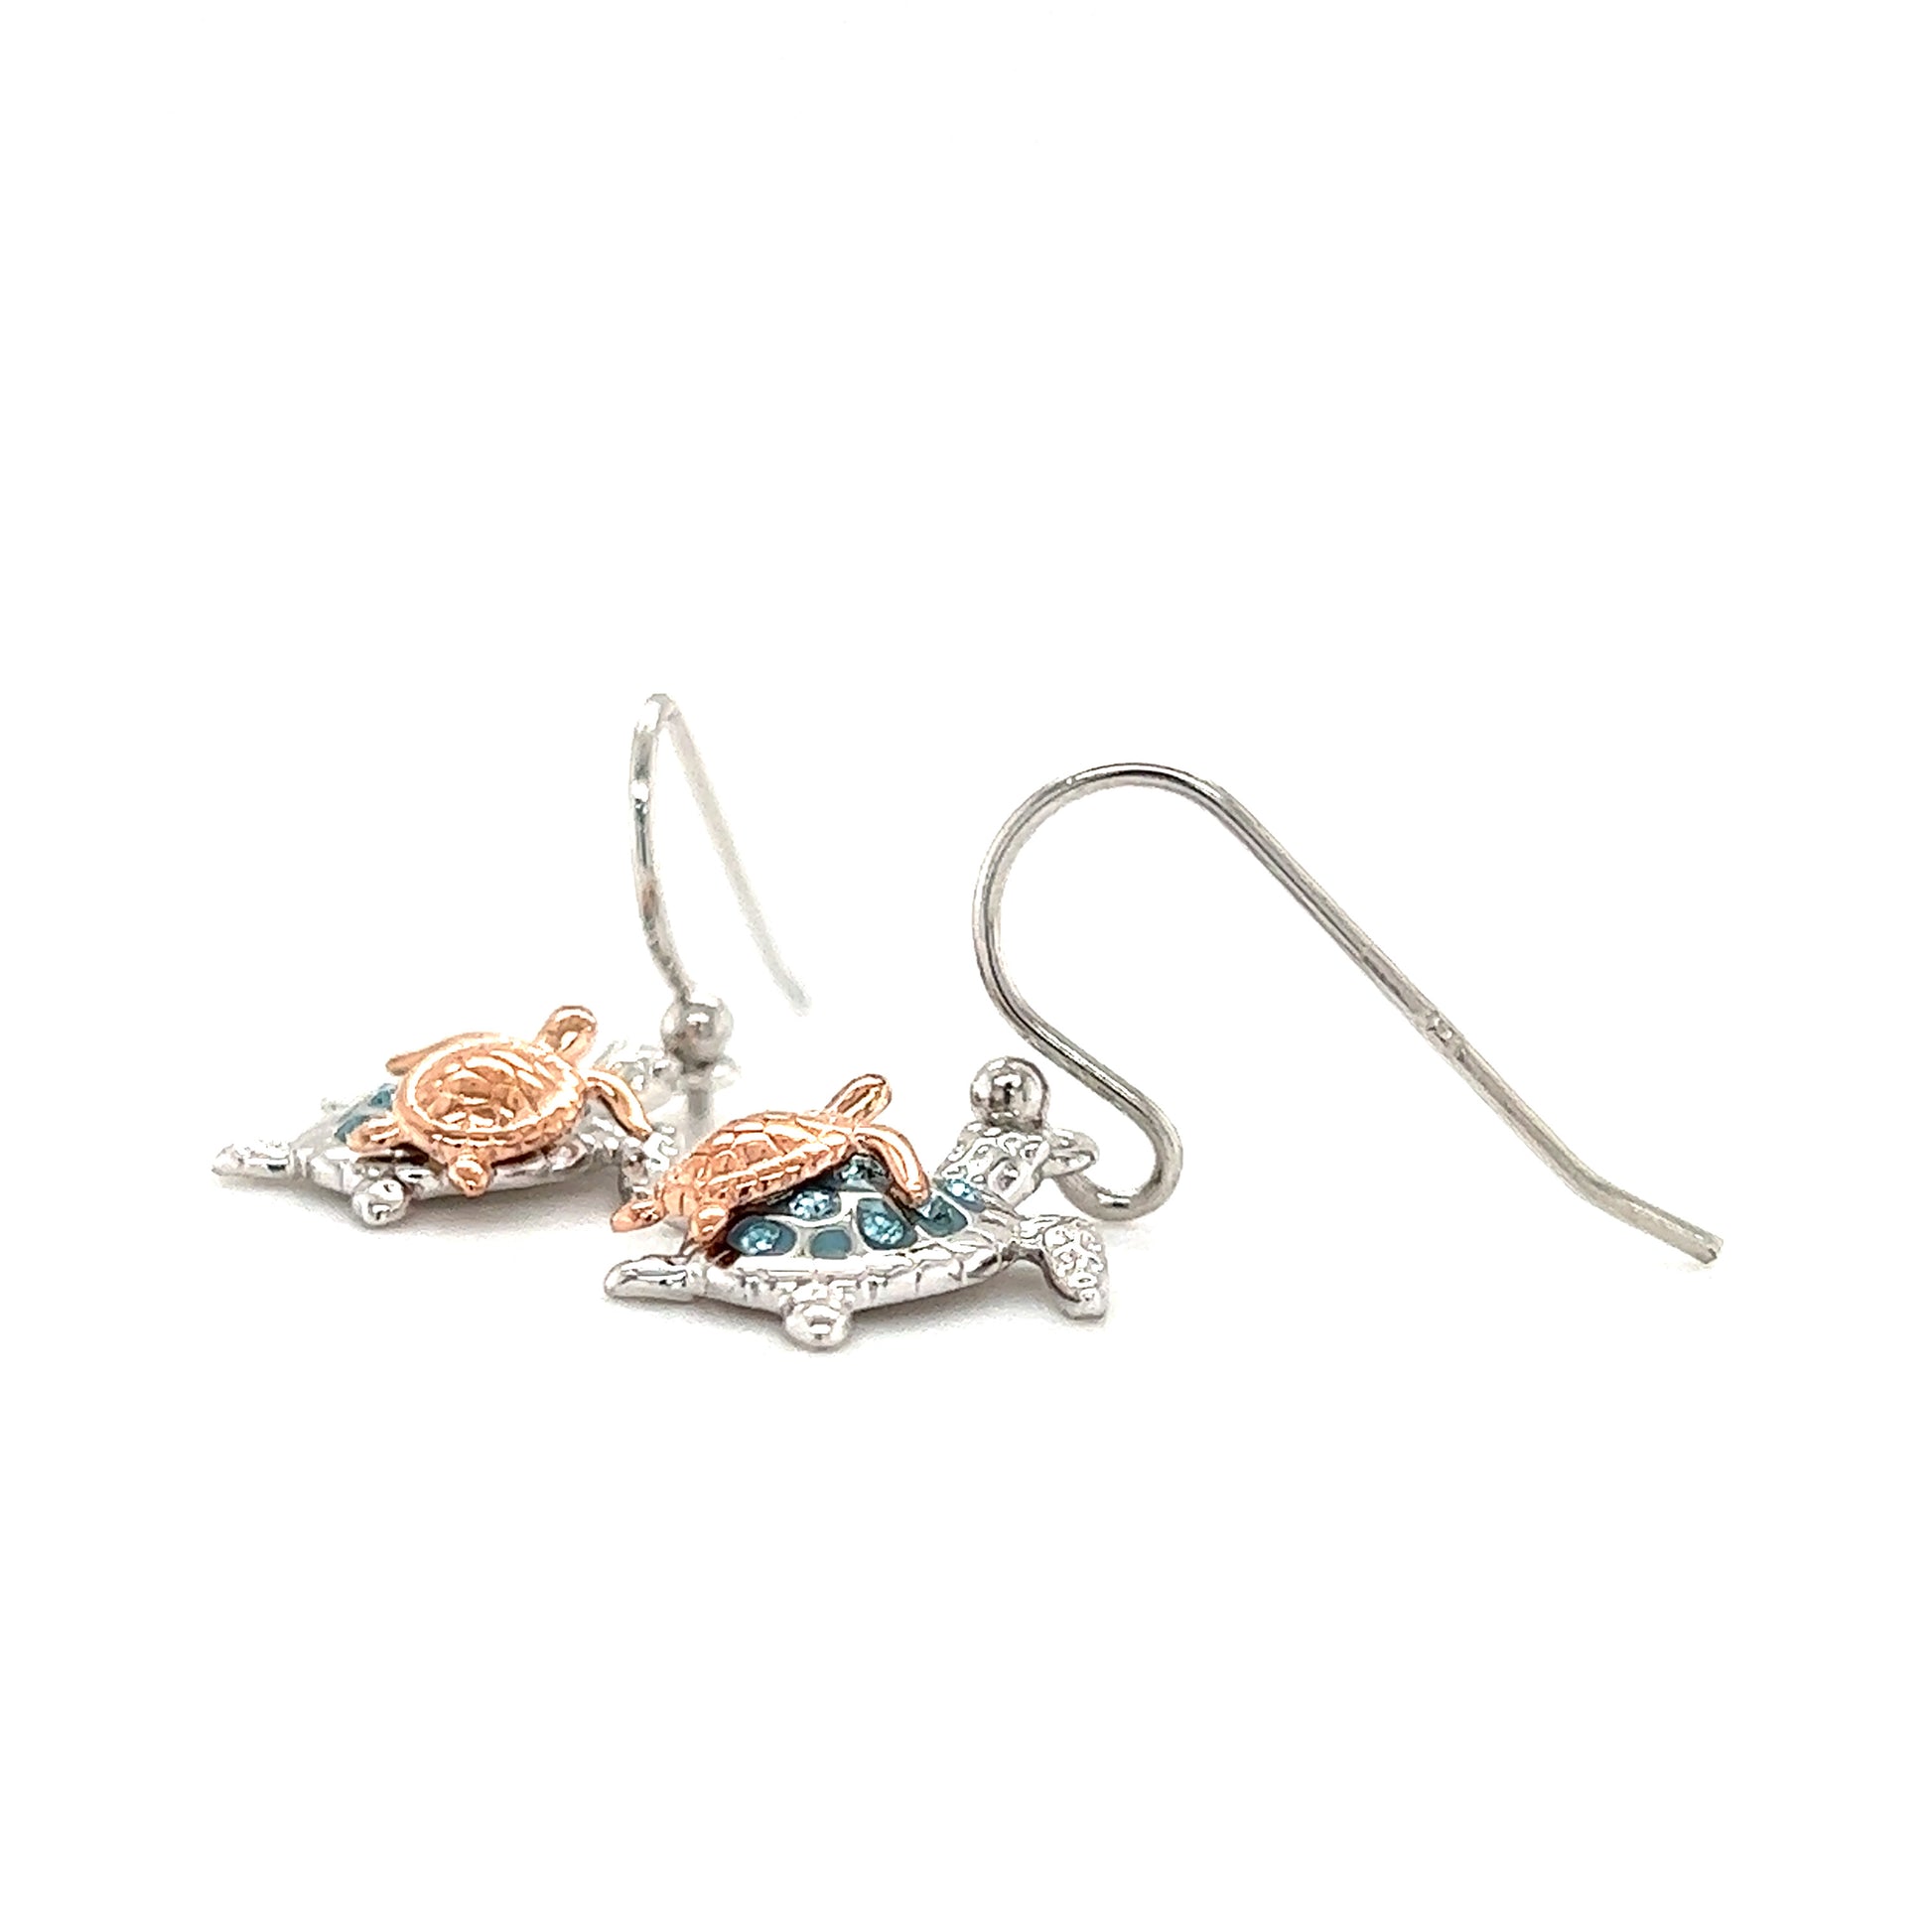 Sea Turtle Dangle Earrings with Rose Gold Accent in Sterling Silver Profile View